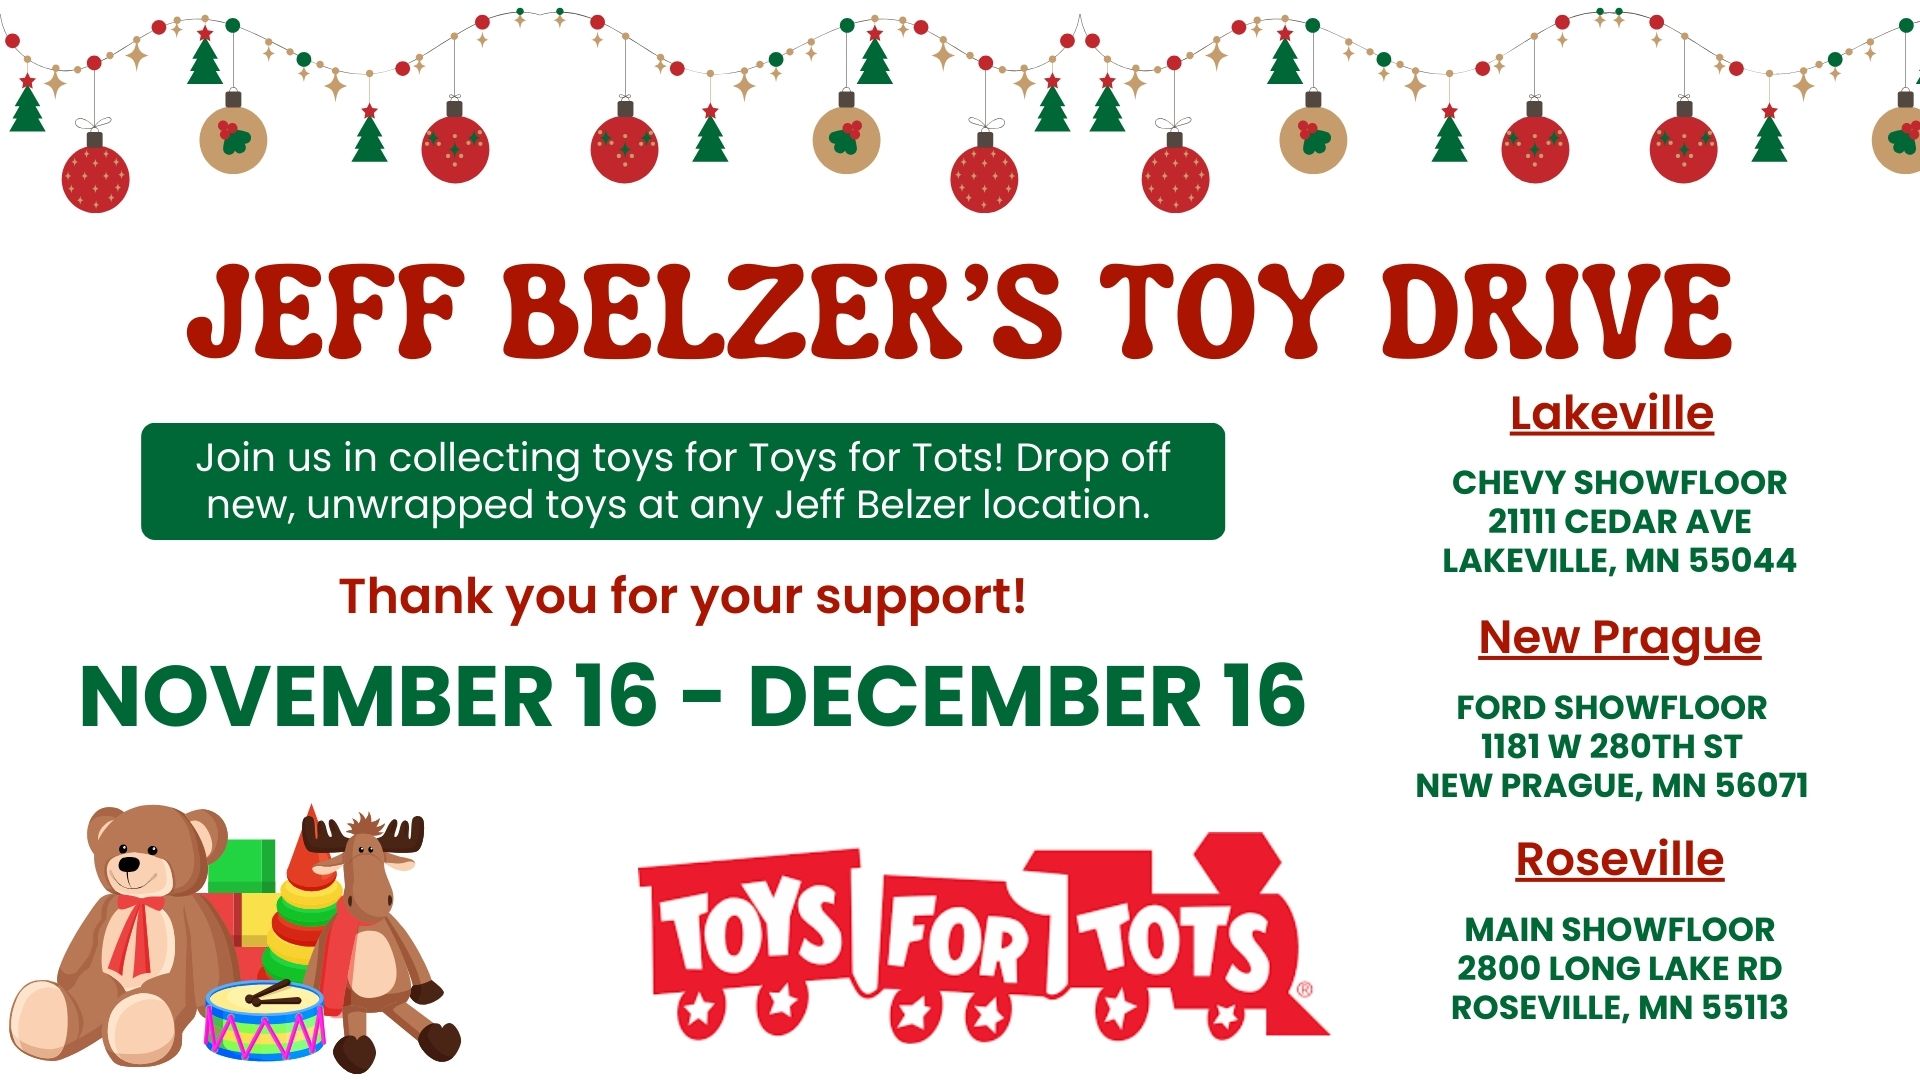 Toy Drive Promotional Flyer